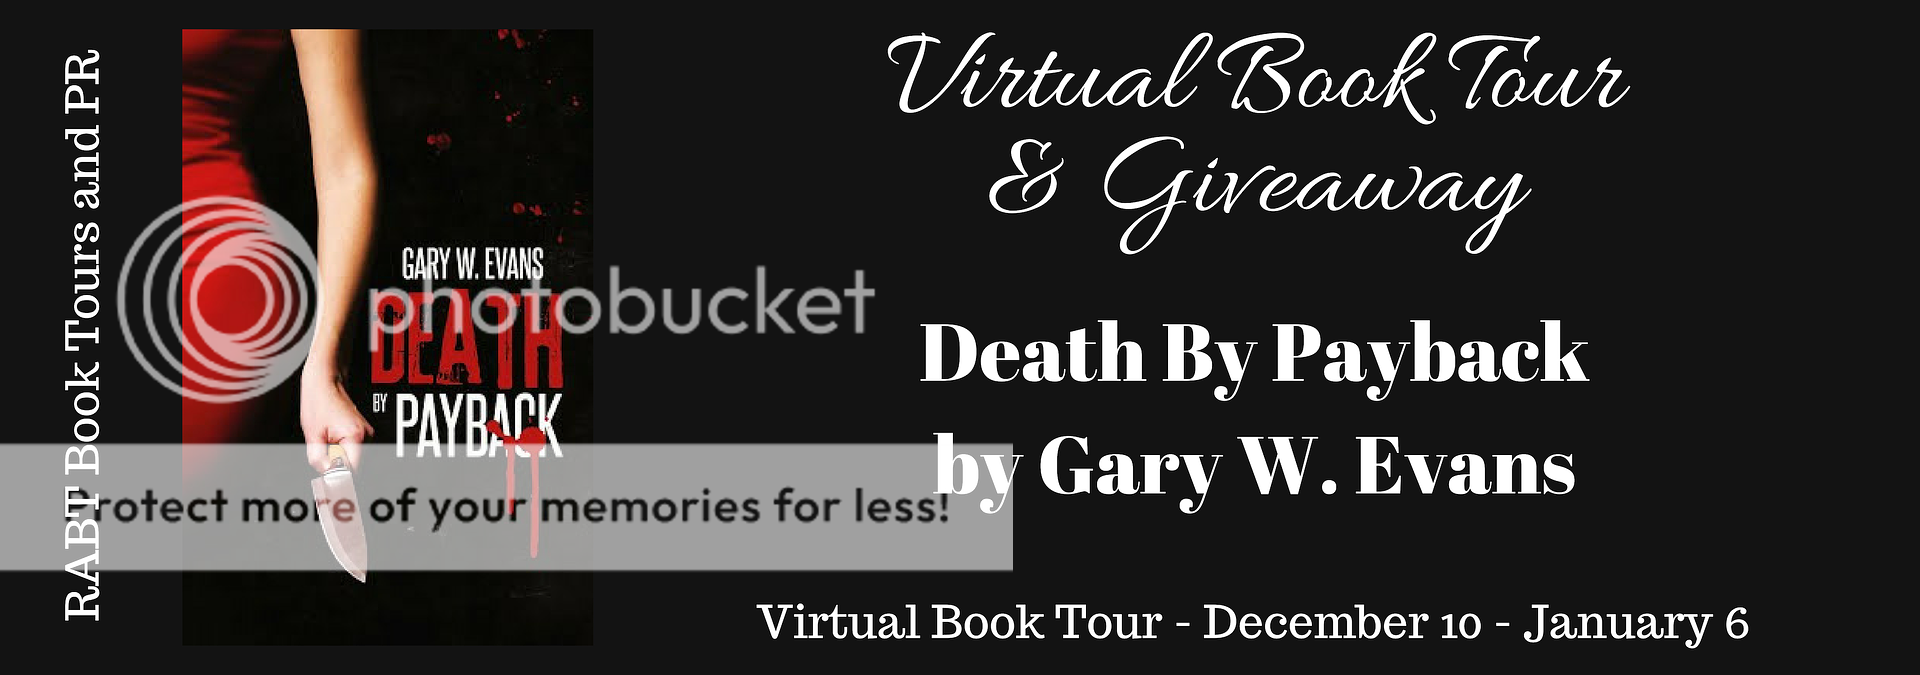 Virtual Book Tour: Death By Payback by Gary Evans @GaryEvansBooks with an #interview and a #giveaway @RABTBookTours #thriller